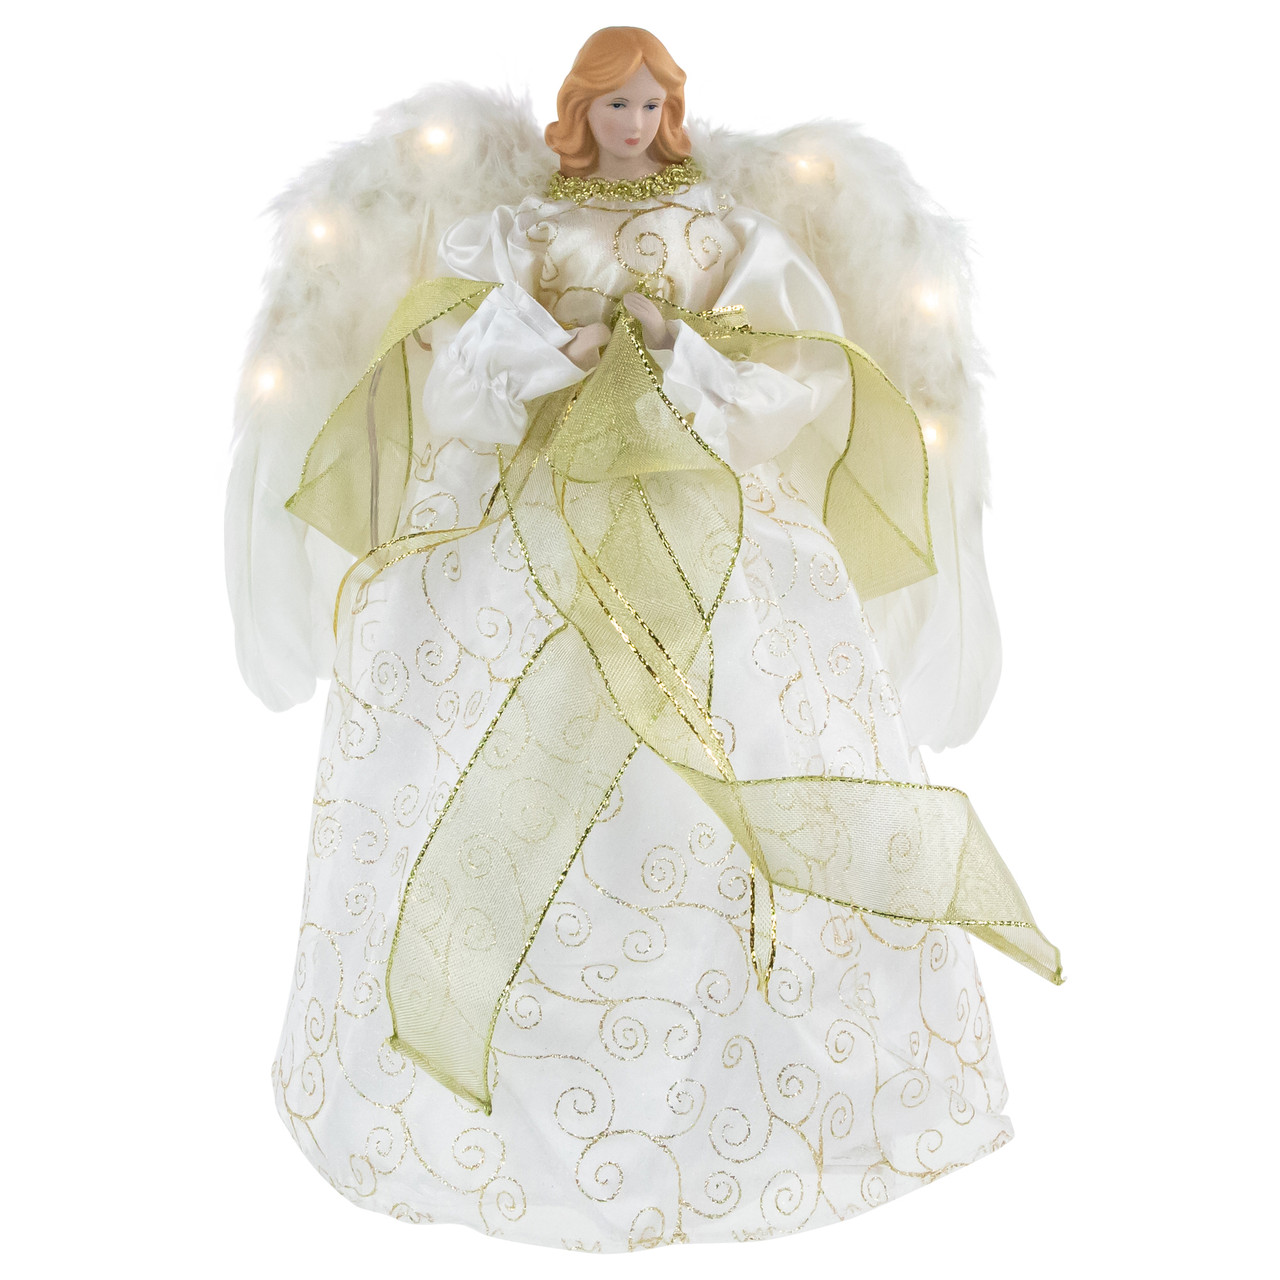 Lighted 10-In Christmas Tree Top Angel -V4981-88 